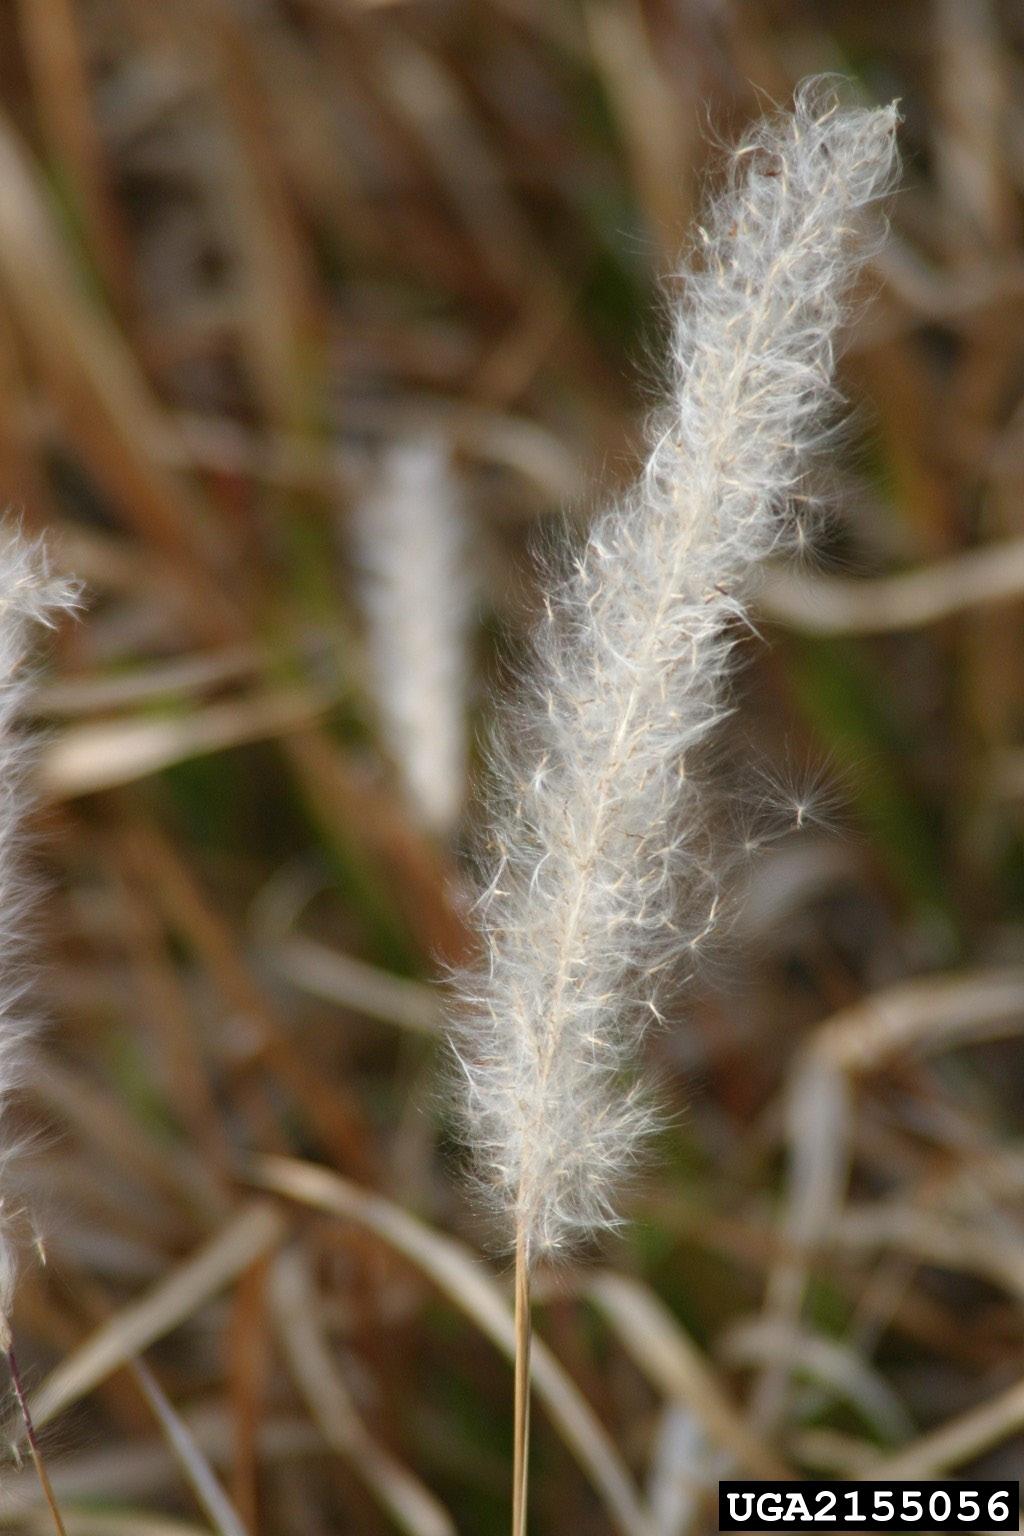 Each seed contains silky-white hairs that aid in wind dispersal. When dug, the rhizomes (Figure 4) are white, segmented (have nodes), and are highly branched.